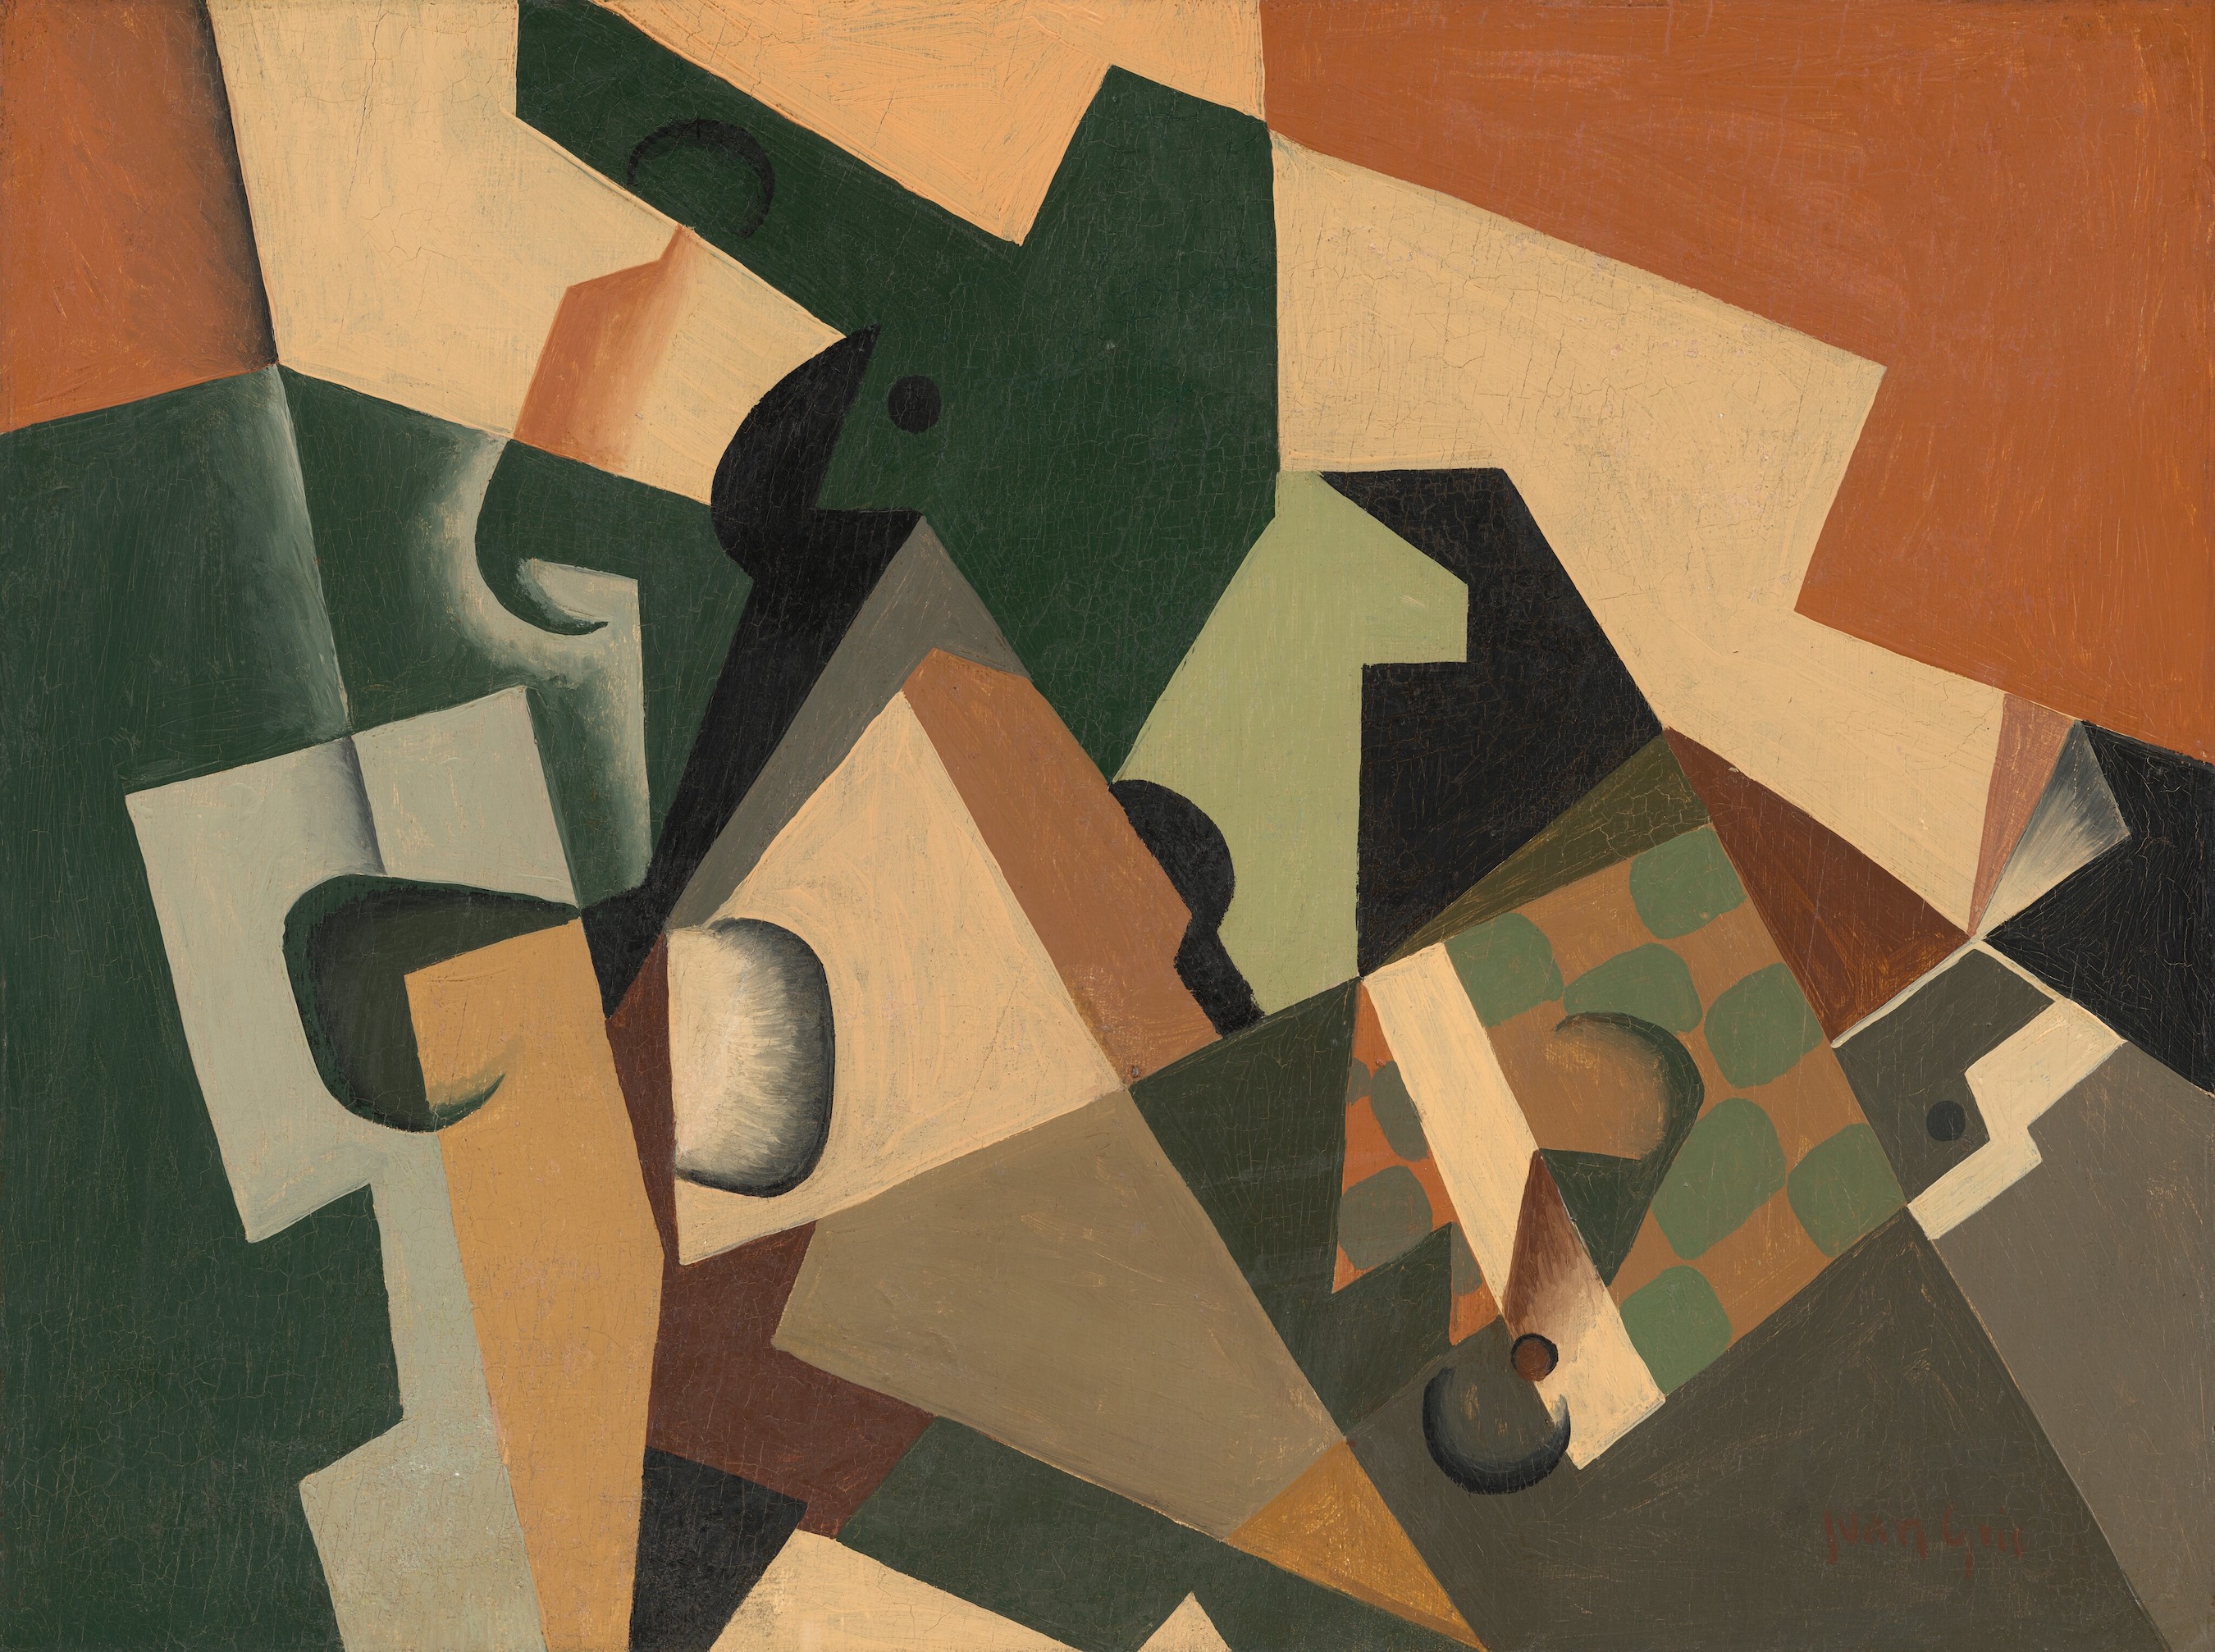 Glass and Checkerboard by Juan Gris - c. 1917 - 29.85 × 41.28 cm National Gallery of Art